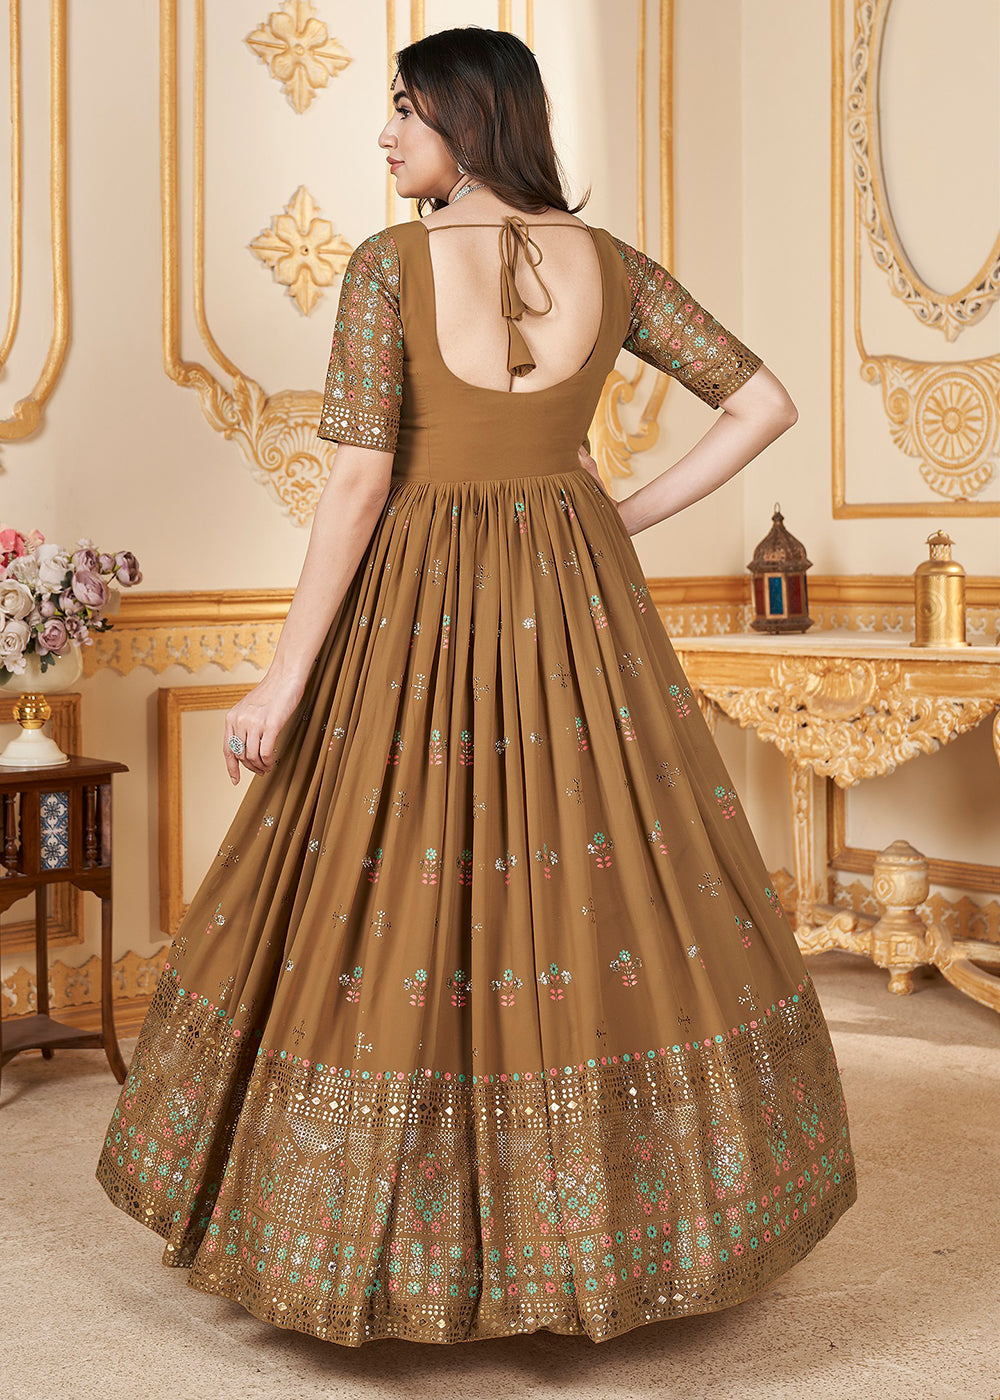 Buy Now Mustard Metalic Foil Work Embroidered Wedding Festive Anarkali Gown Online in USA, UK, Australia, Canada & Worldwide at Empress Clothing. 